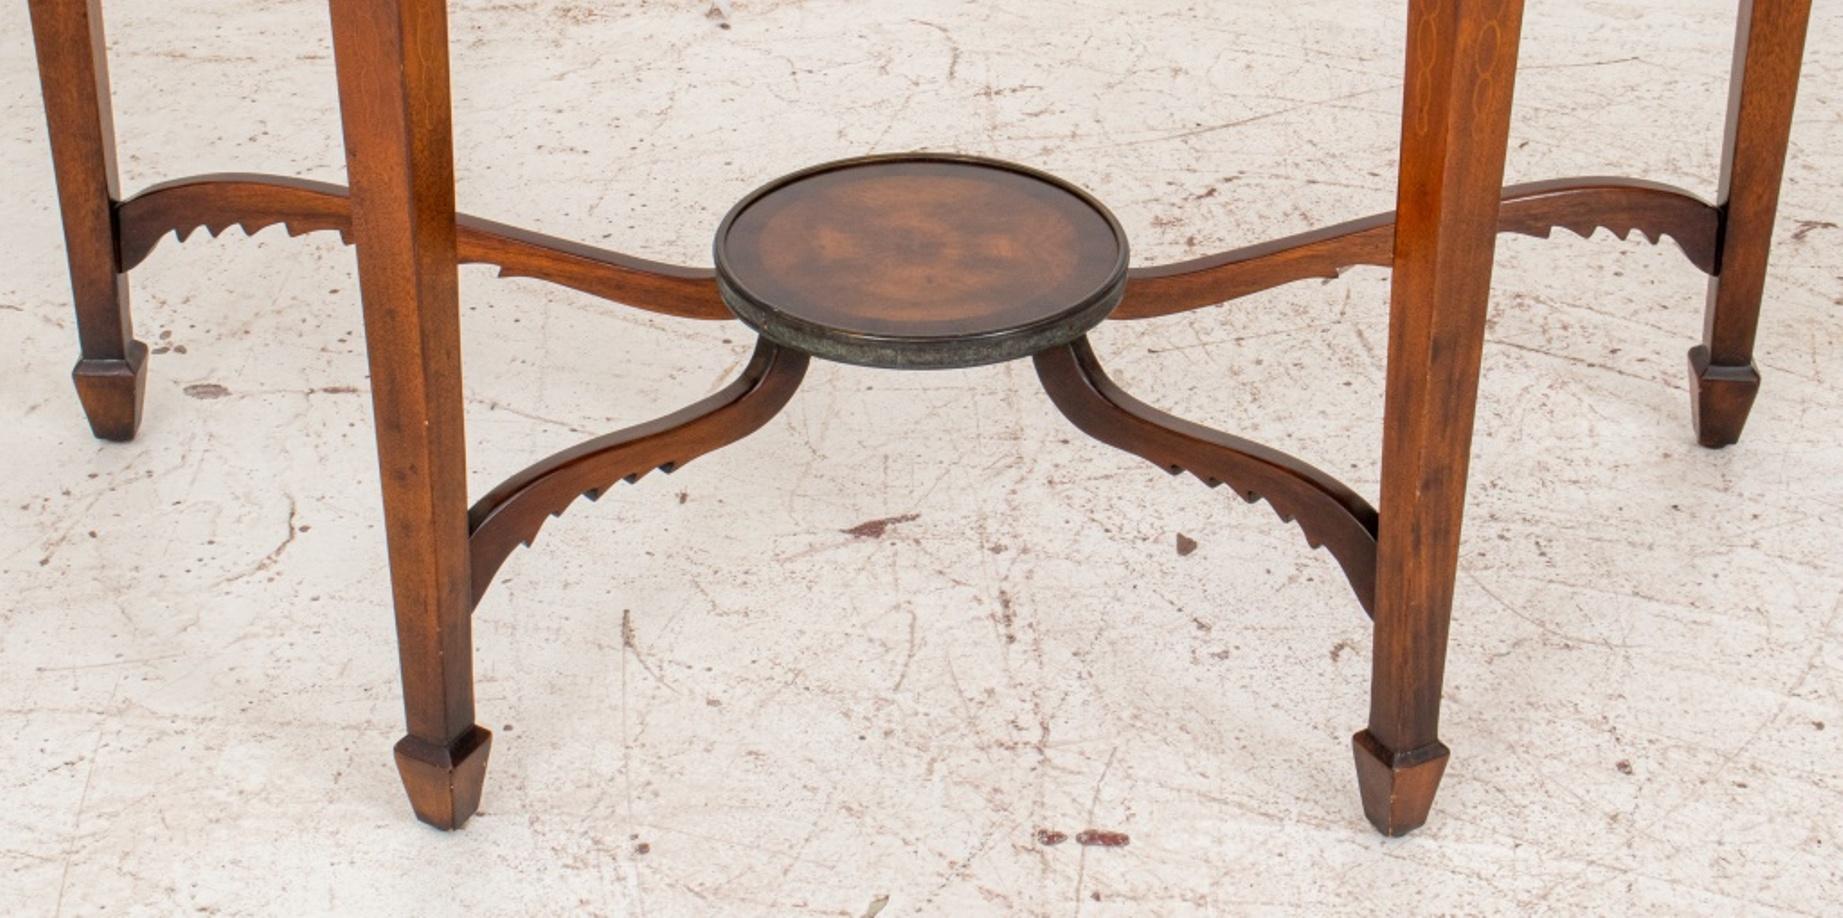 20th Century George III Style Demilune Table